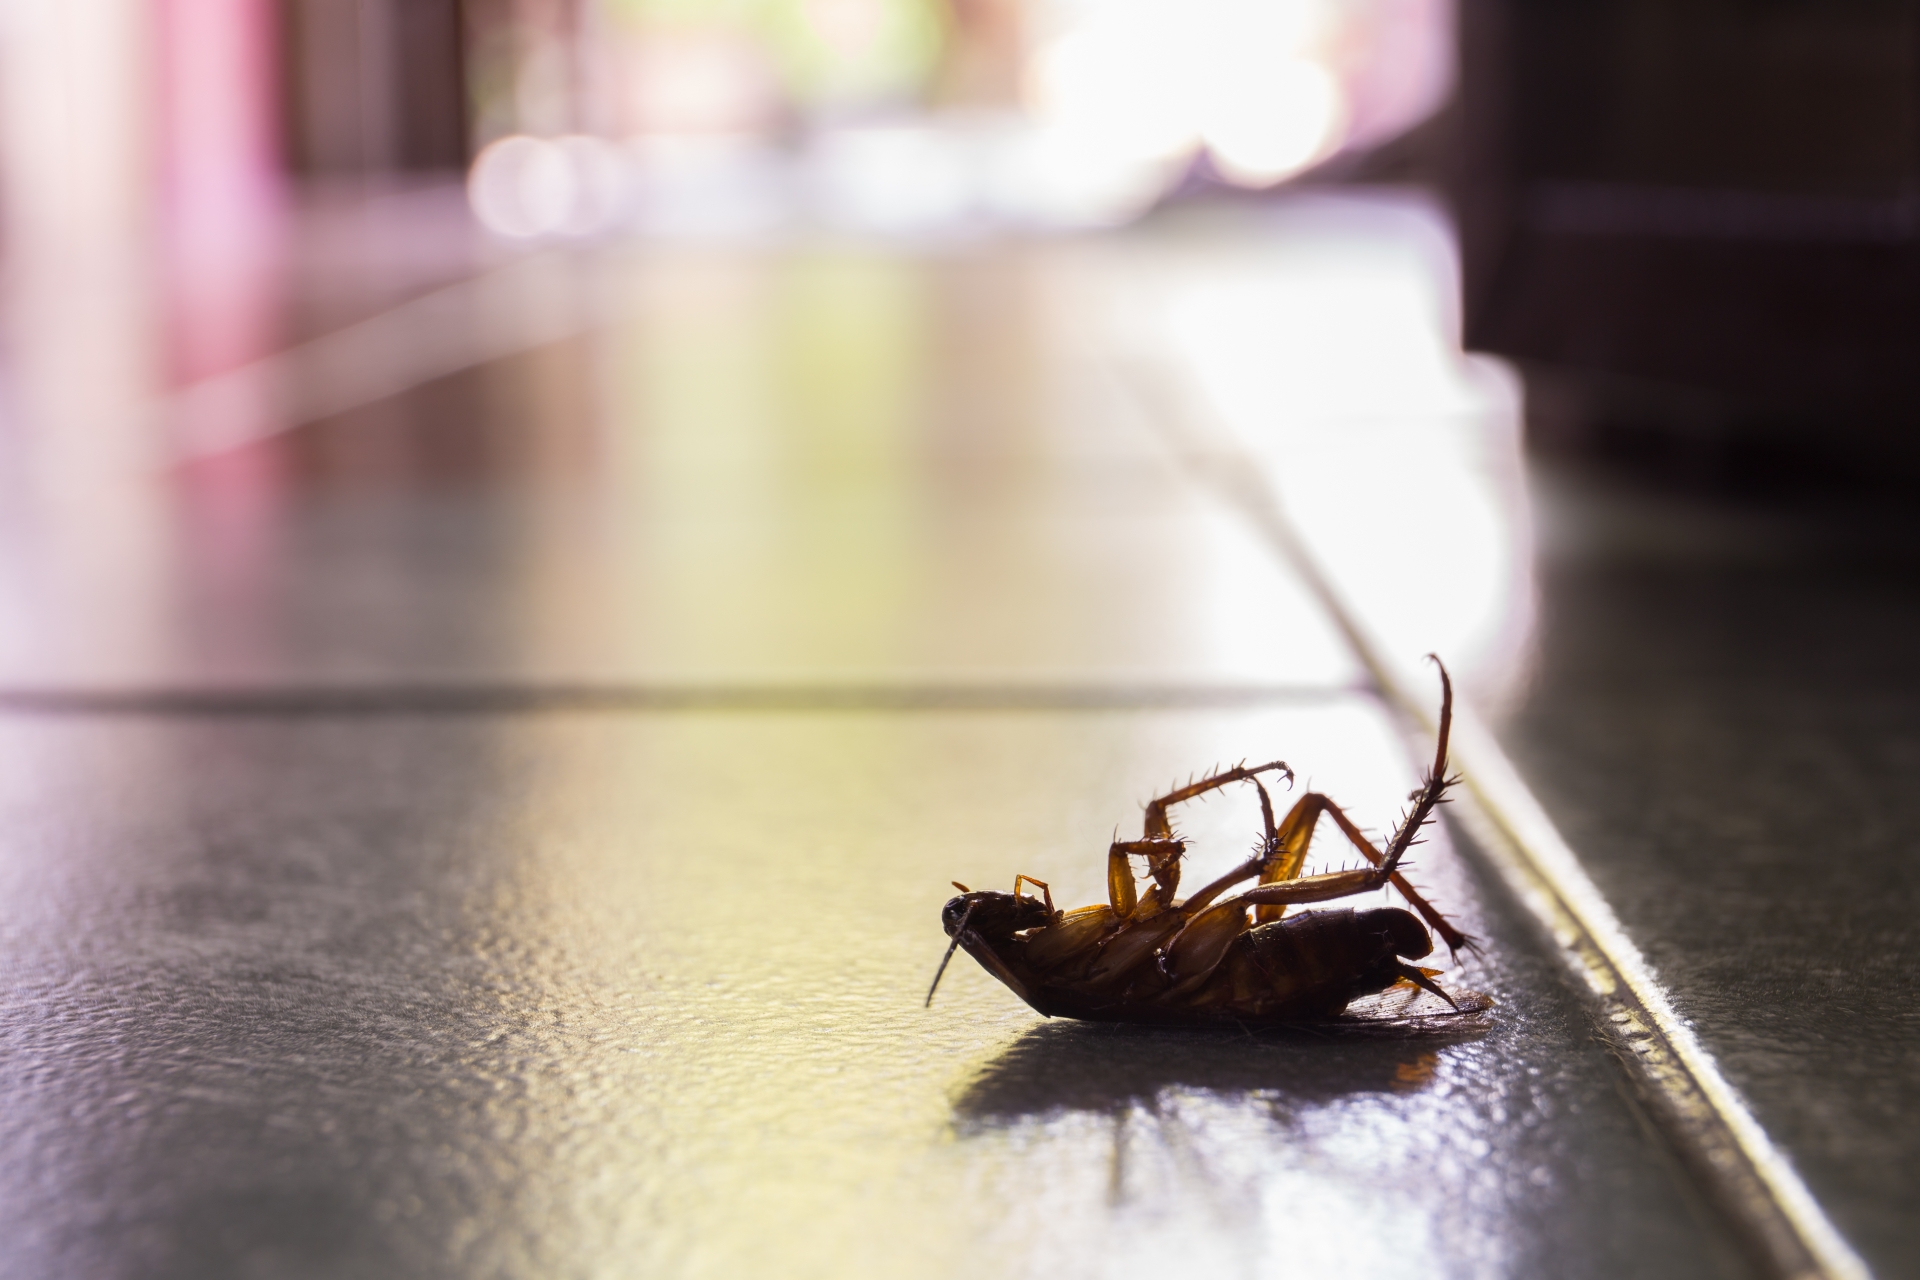 Cockroach Control, Pest Control in Croydon, Addiscombe, Selhurst, CR0. Call Now 020 8166 9746